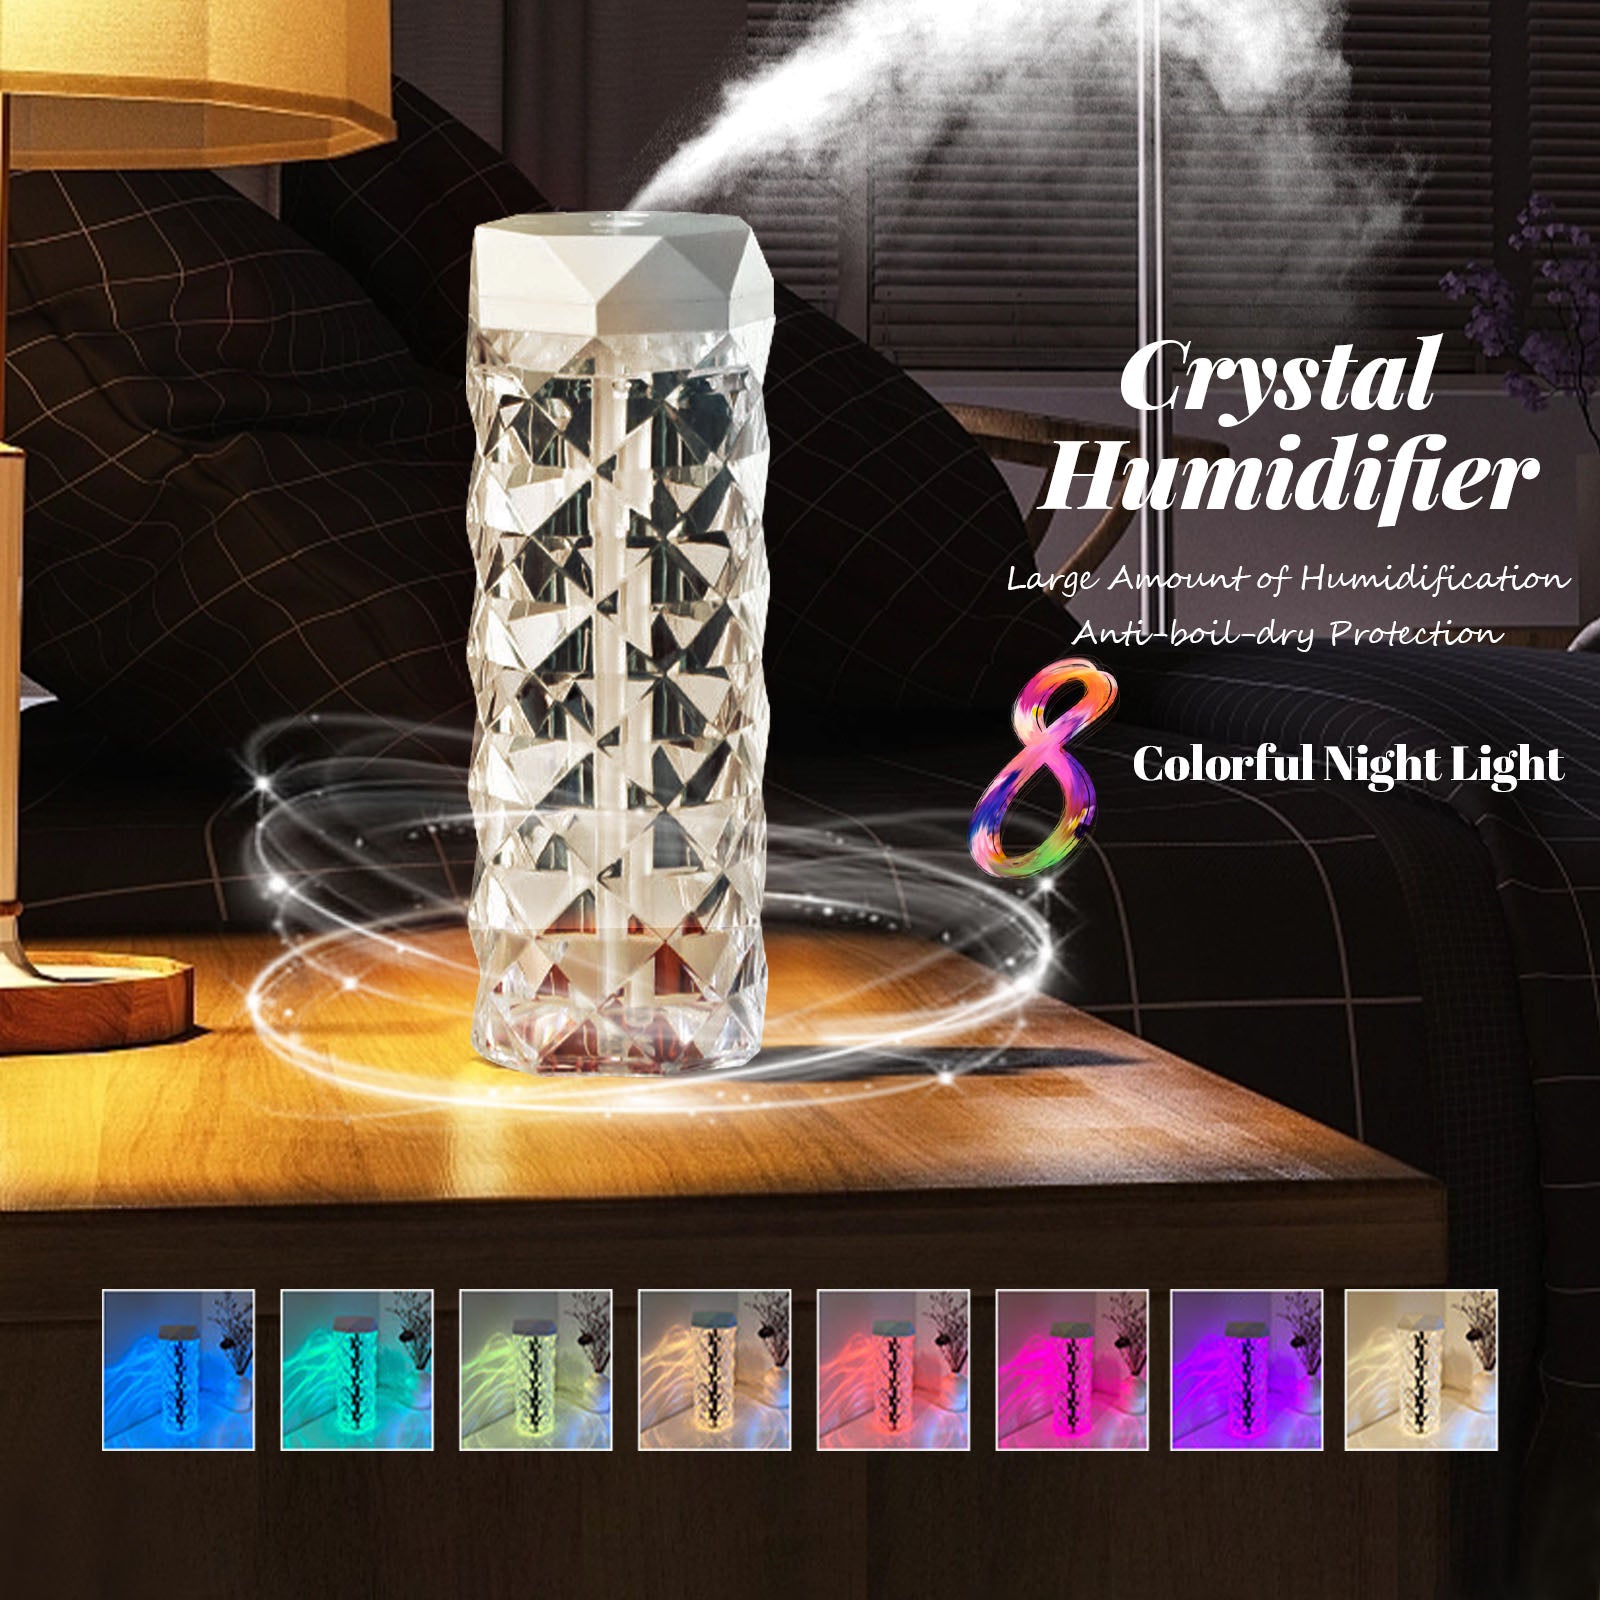 crystal-lamp-air-humidifier-color-night-light-touch-lamp-with-cool-mist-maker-fogger-led-atmosphere-room-decoration-home-decor-lights